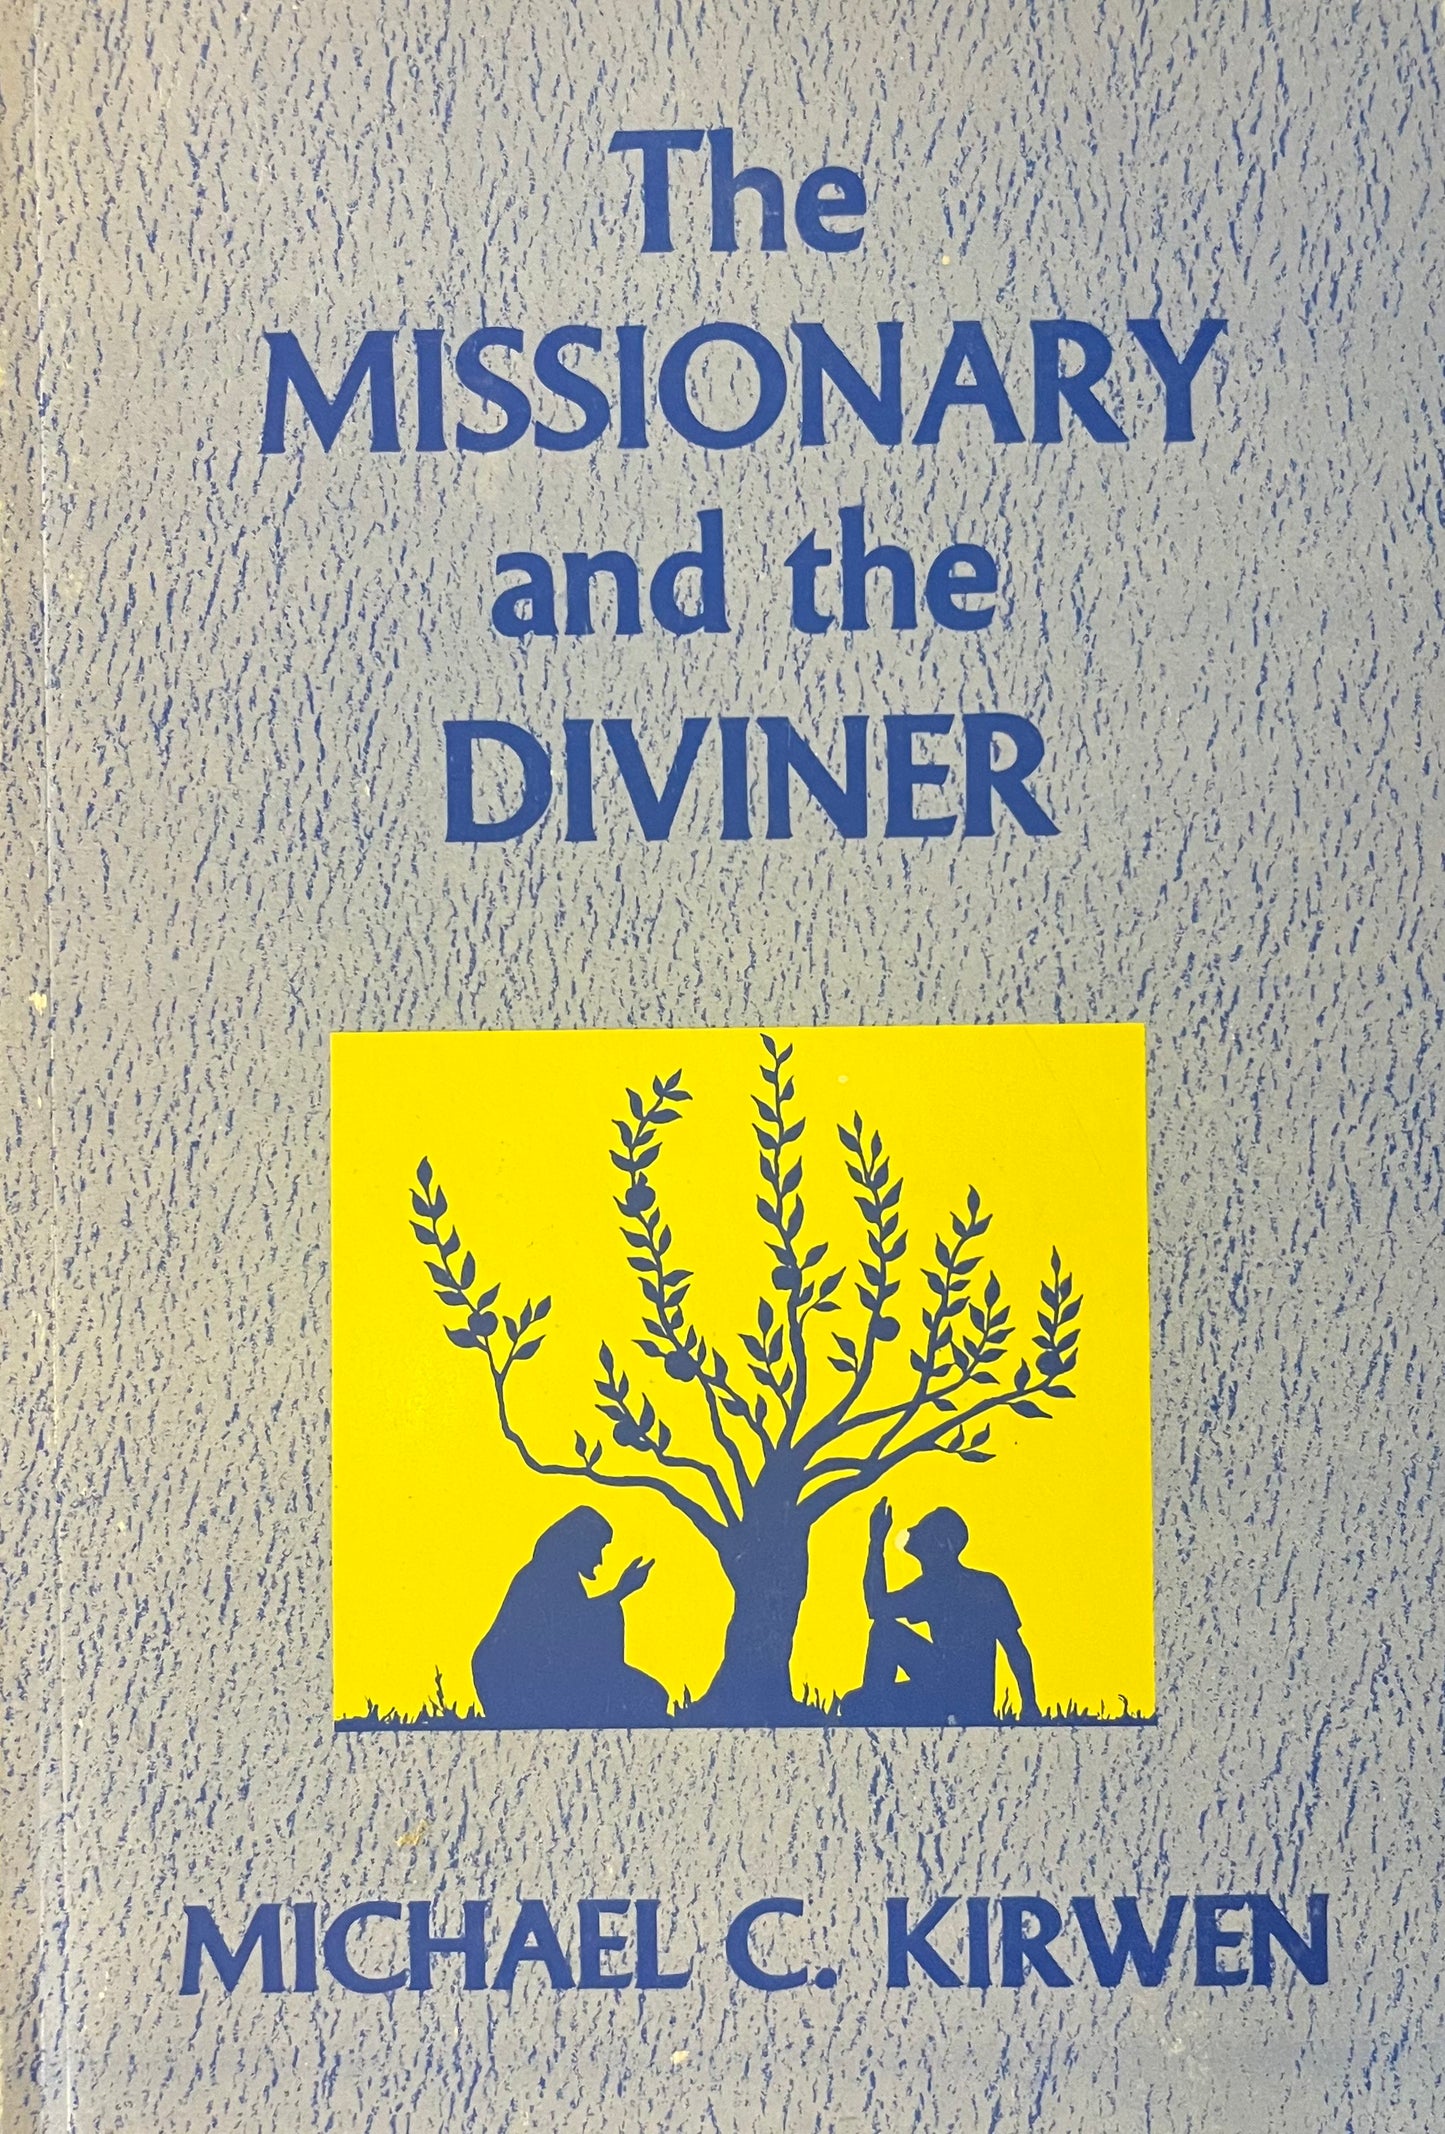 THE MISSIONARY AND THE DIVINER By Michael C. Kirwen